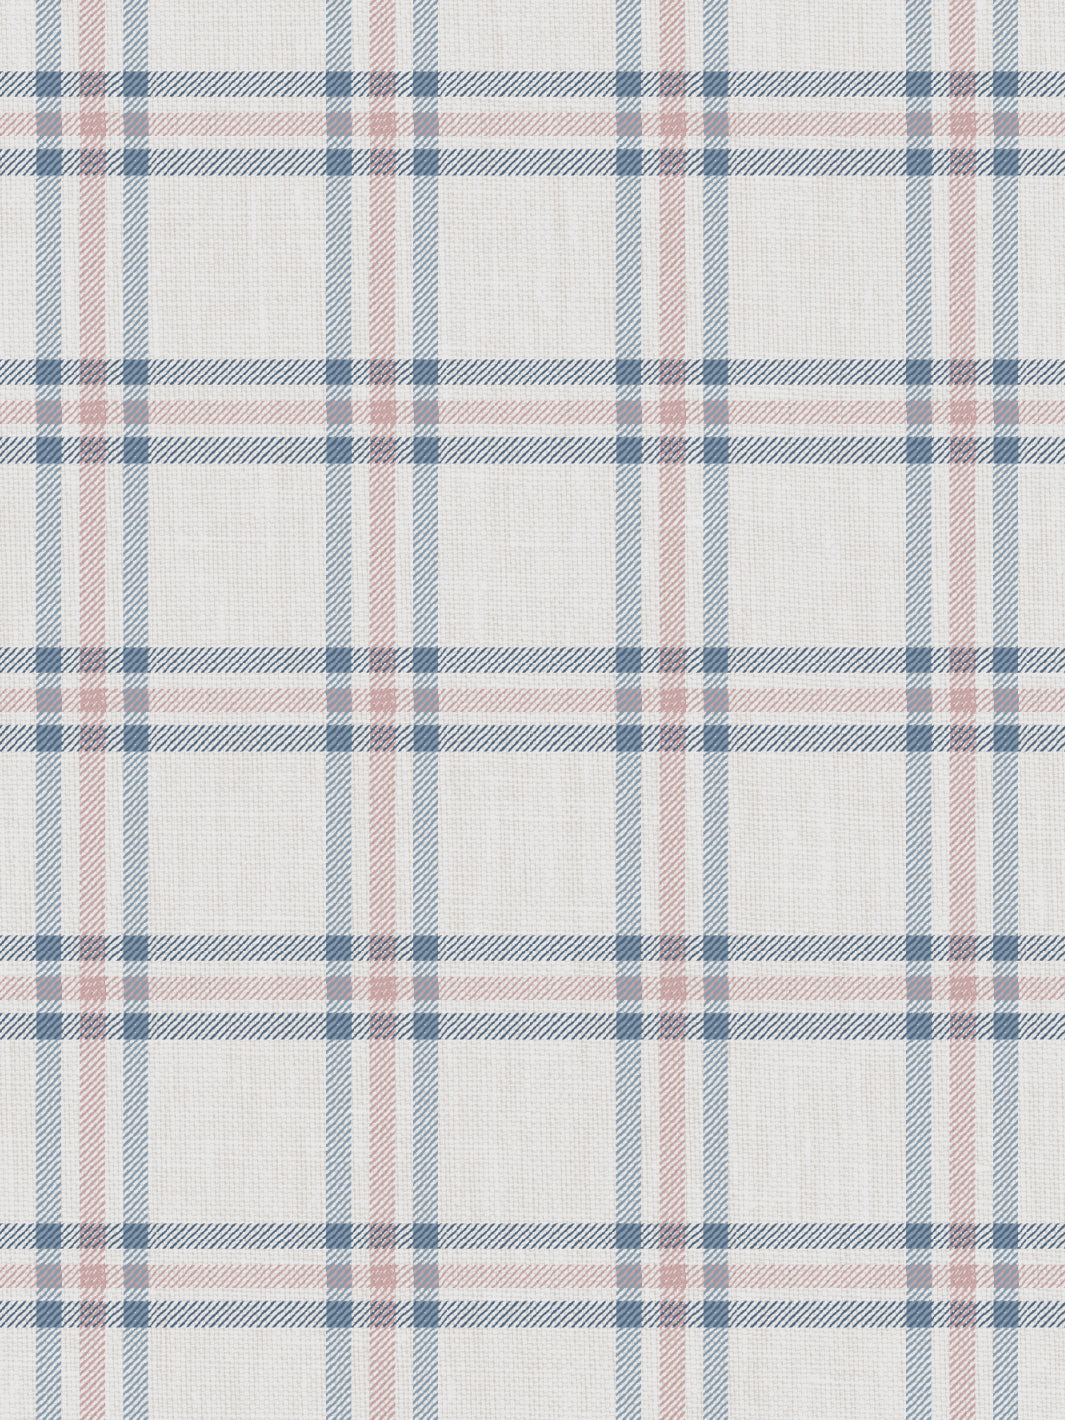 'Rogers Plaid' Wallpaper by Nathan Turner - Blue Pink